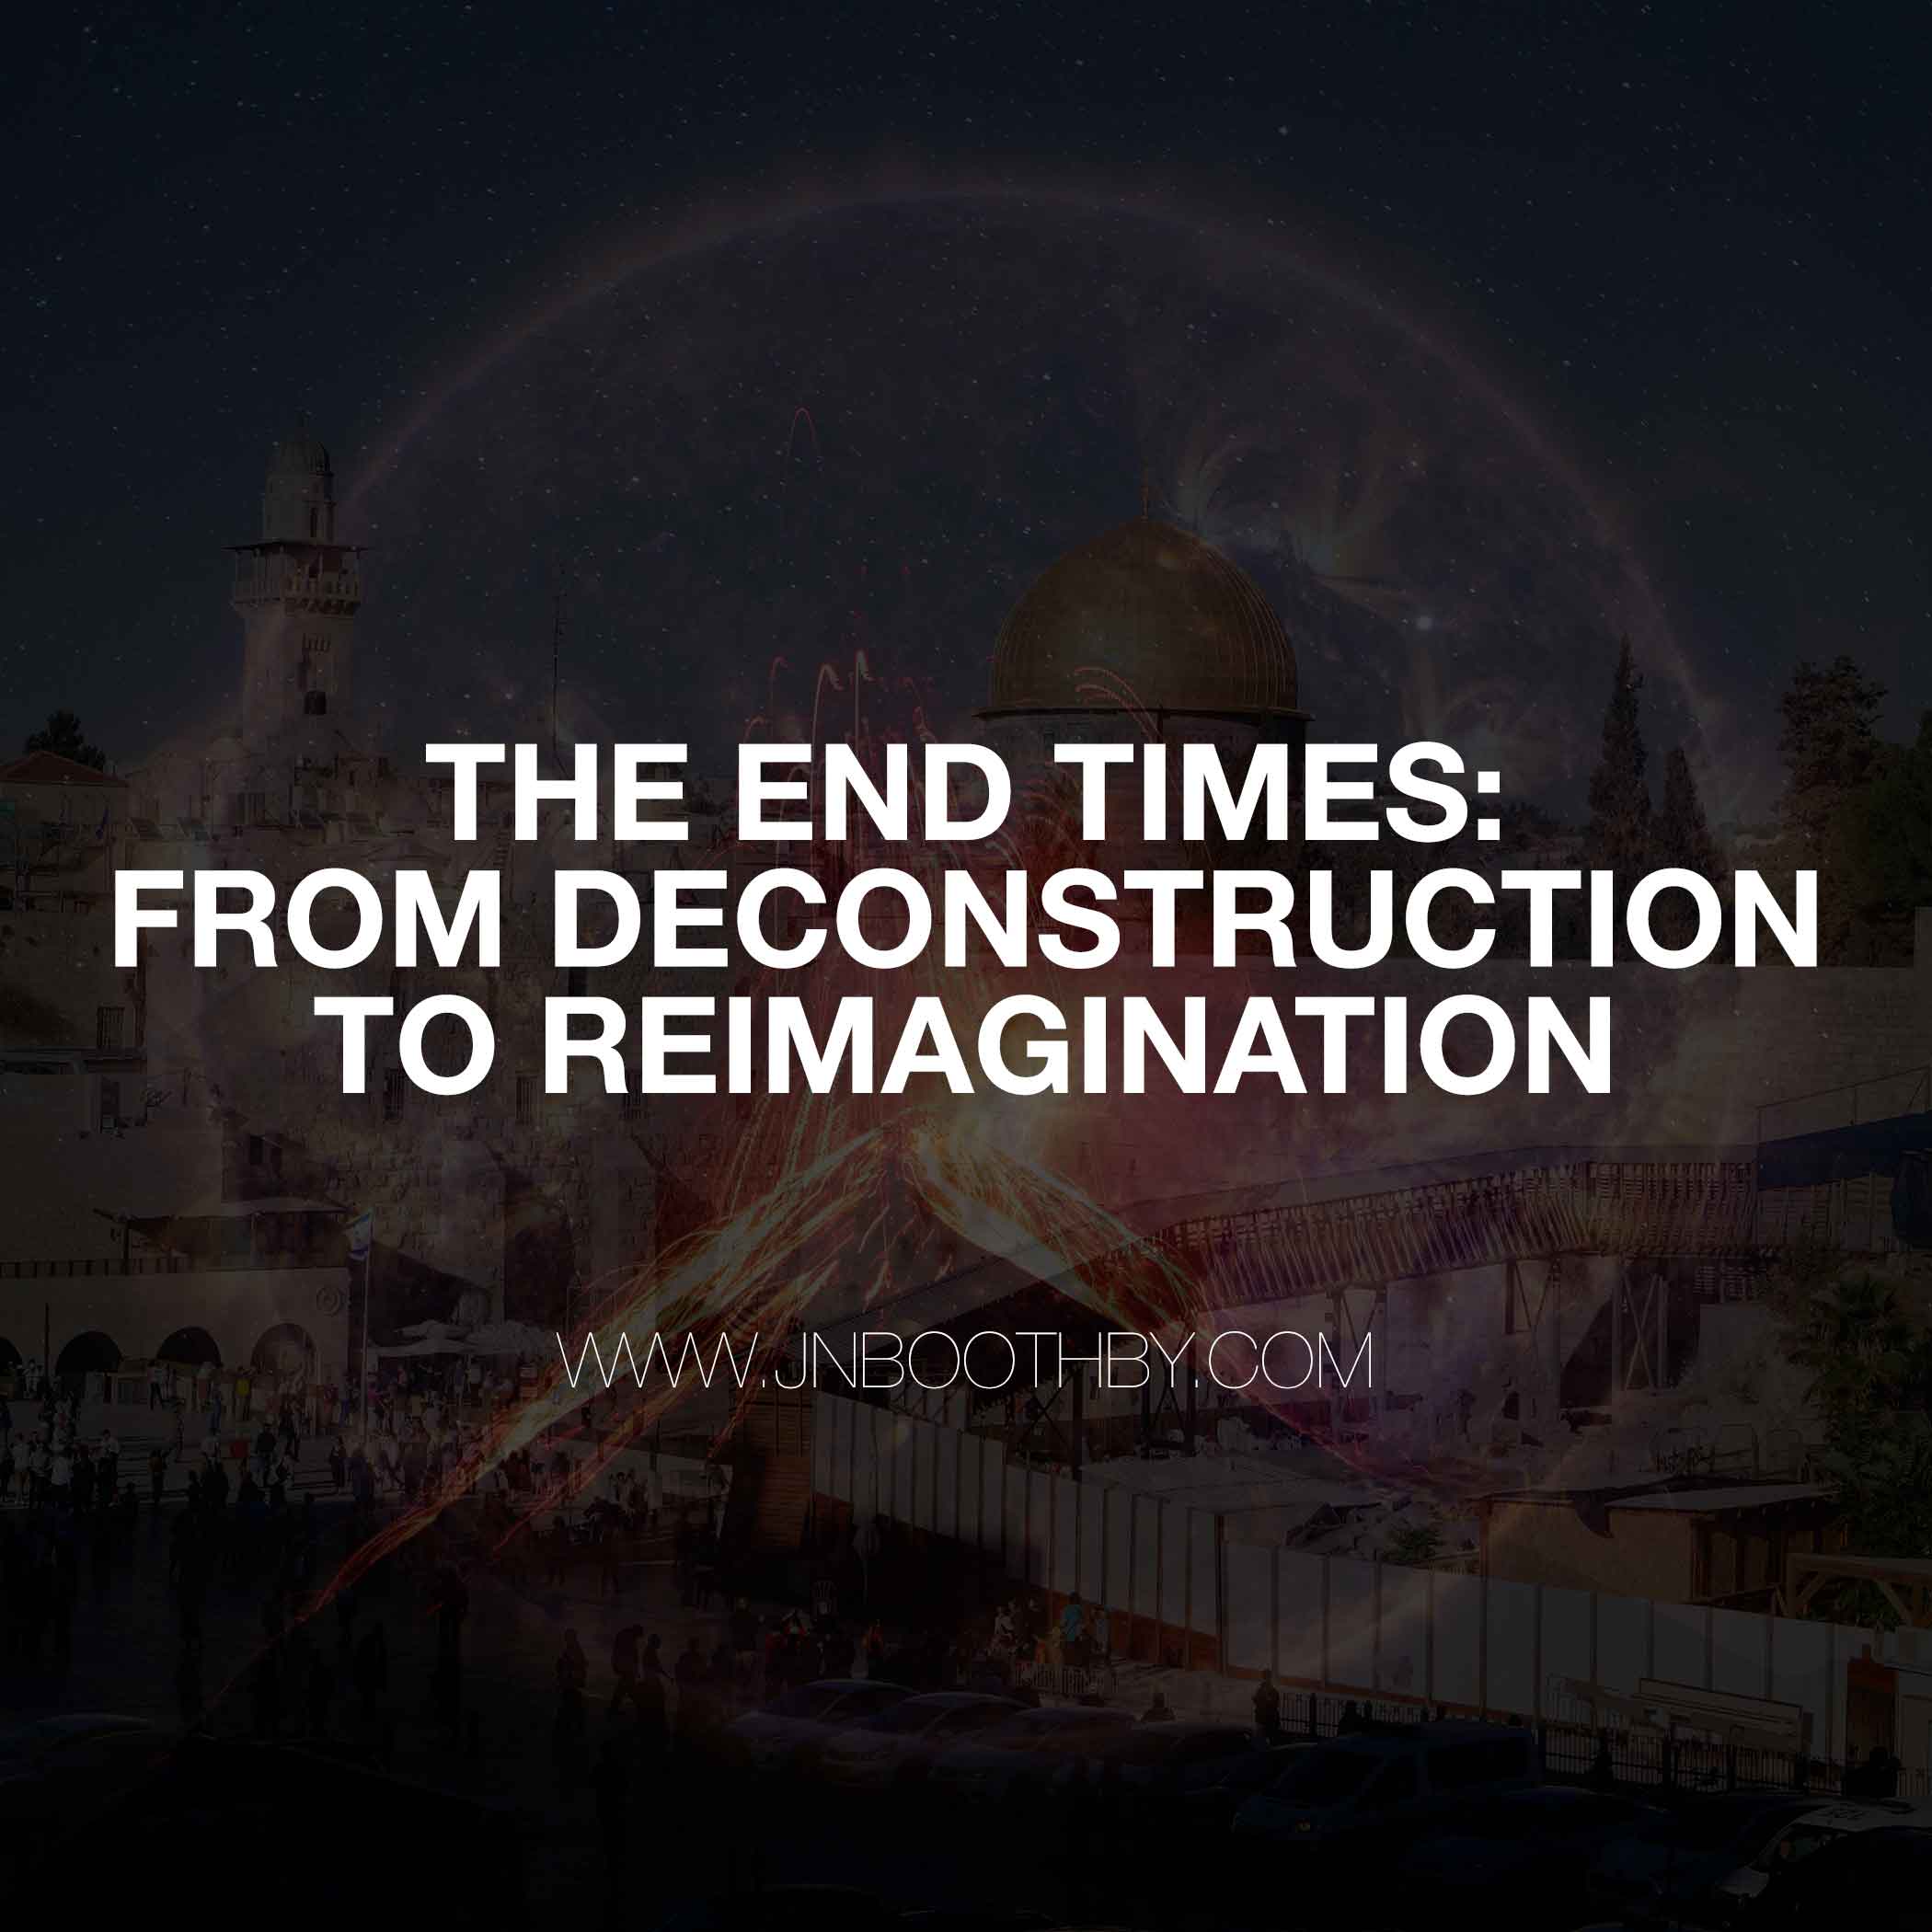 The End Times (Eschatology) From Deconstruction To Reimagination